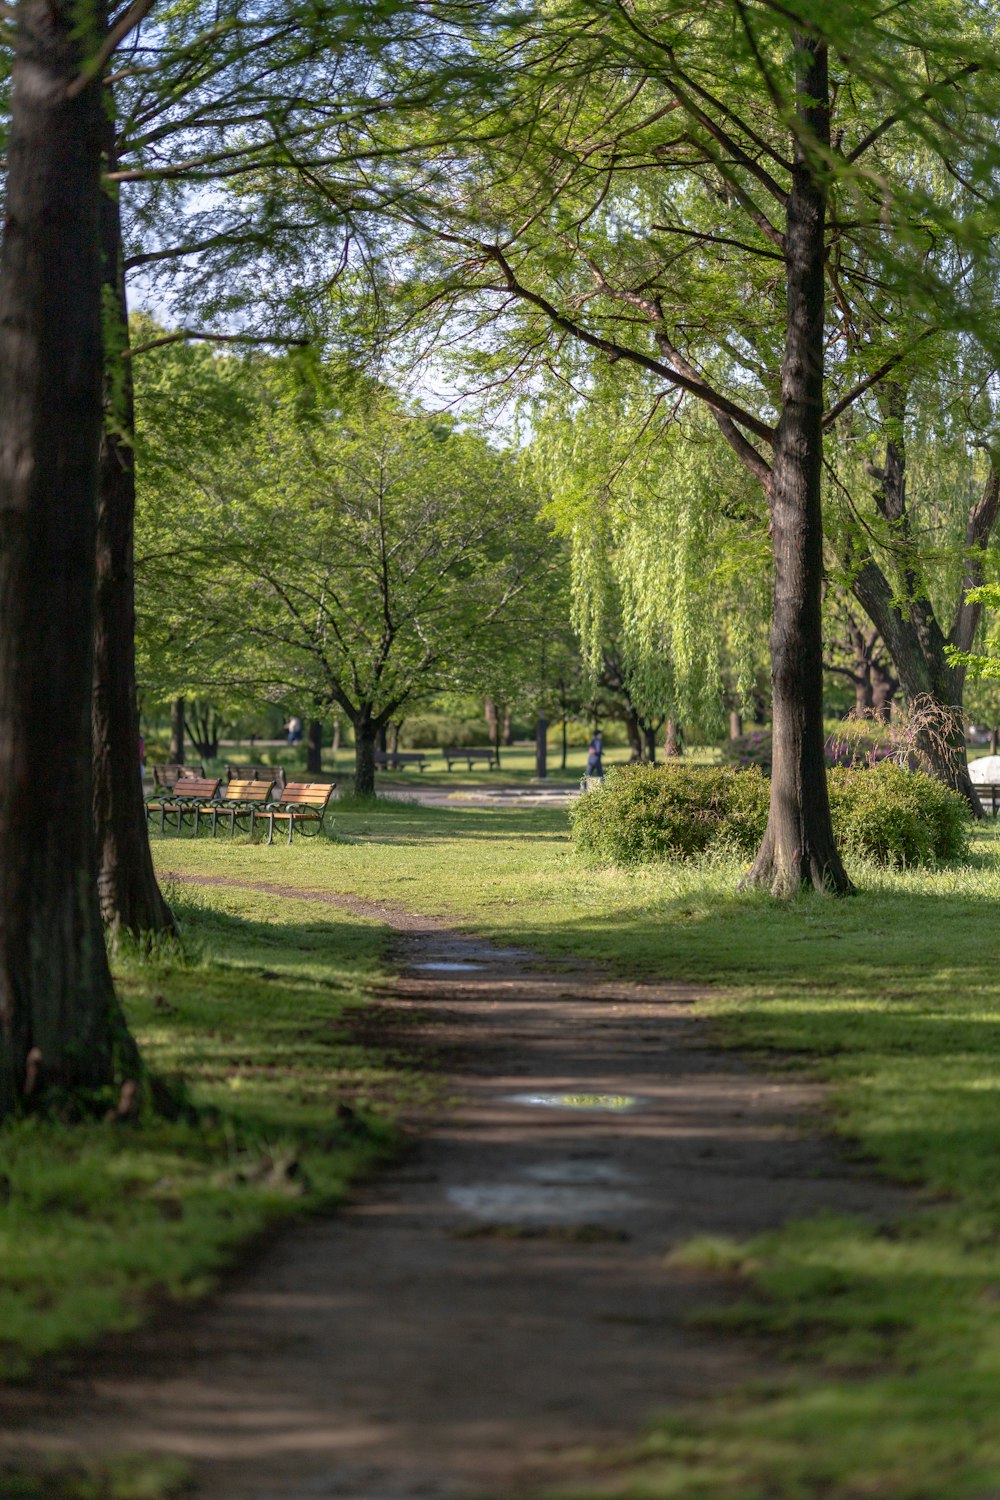 a path in a park with trees and benches